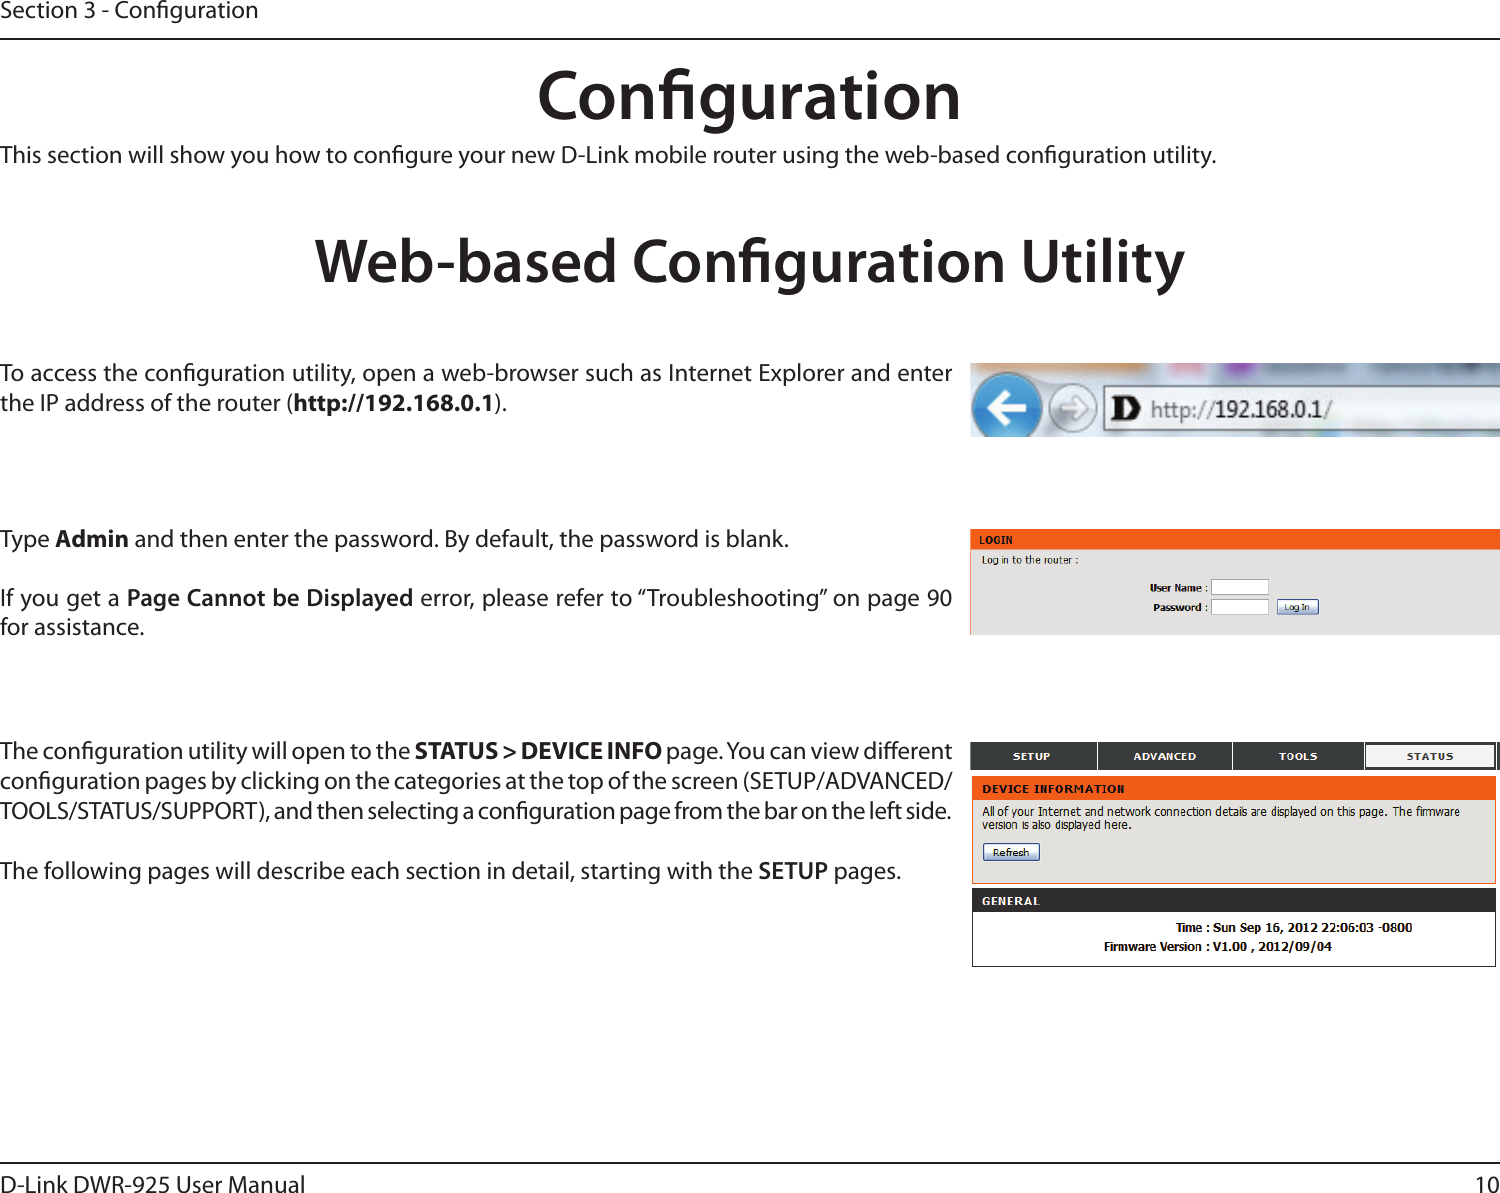 10D-Link DWR-925 User ManualSection 3 - CongurationCongurationThis section will show you how to congure your new D-Link mobile router using the web-based conguration utility.Web-based Conguration UtilityTo access the conguration utility, open a web-browser such as Internet Explorer and enter the IP address of the router (http://192.168.0.1).Type Admin and then enter the password. By default, the password is blank.If you get a Page Cannot be Displayed error, please refer to “Troubleshooting” on page 90 for assistance.The conguration utility will open to the STATUS &gt; DEVICE INFO page. You can view dierent conguration pages by clicking on the categories at the top of the screen (SETUP/ADVANCED/TOOLS/STATUS/SUPPORT), and then selecting a conguration page from the bar on the left side.The following pages will describe each section in detail, starting with the SETUP pages.